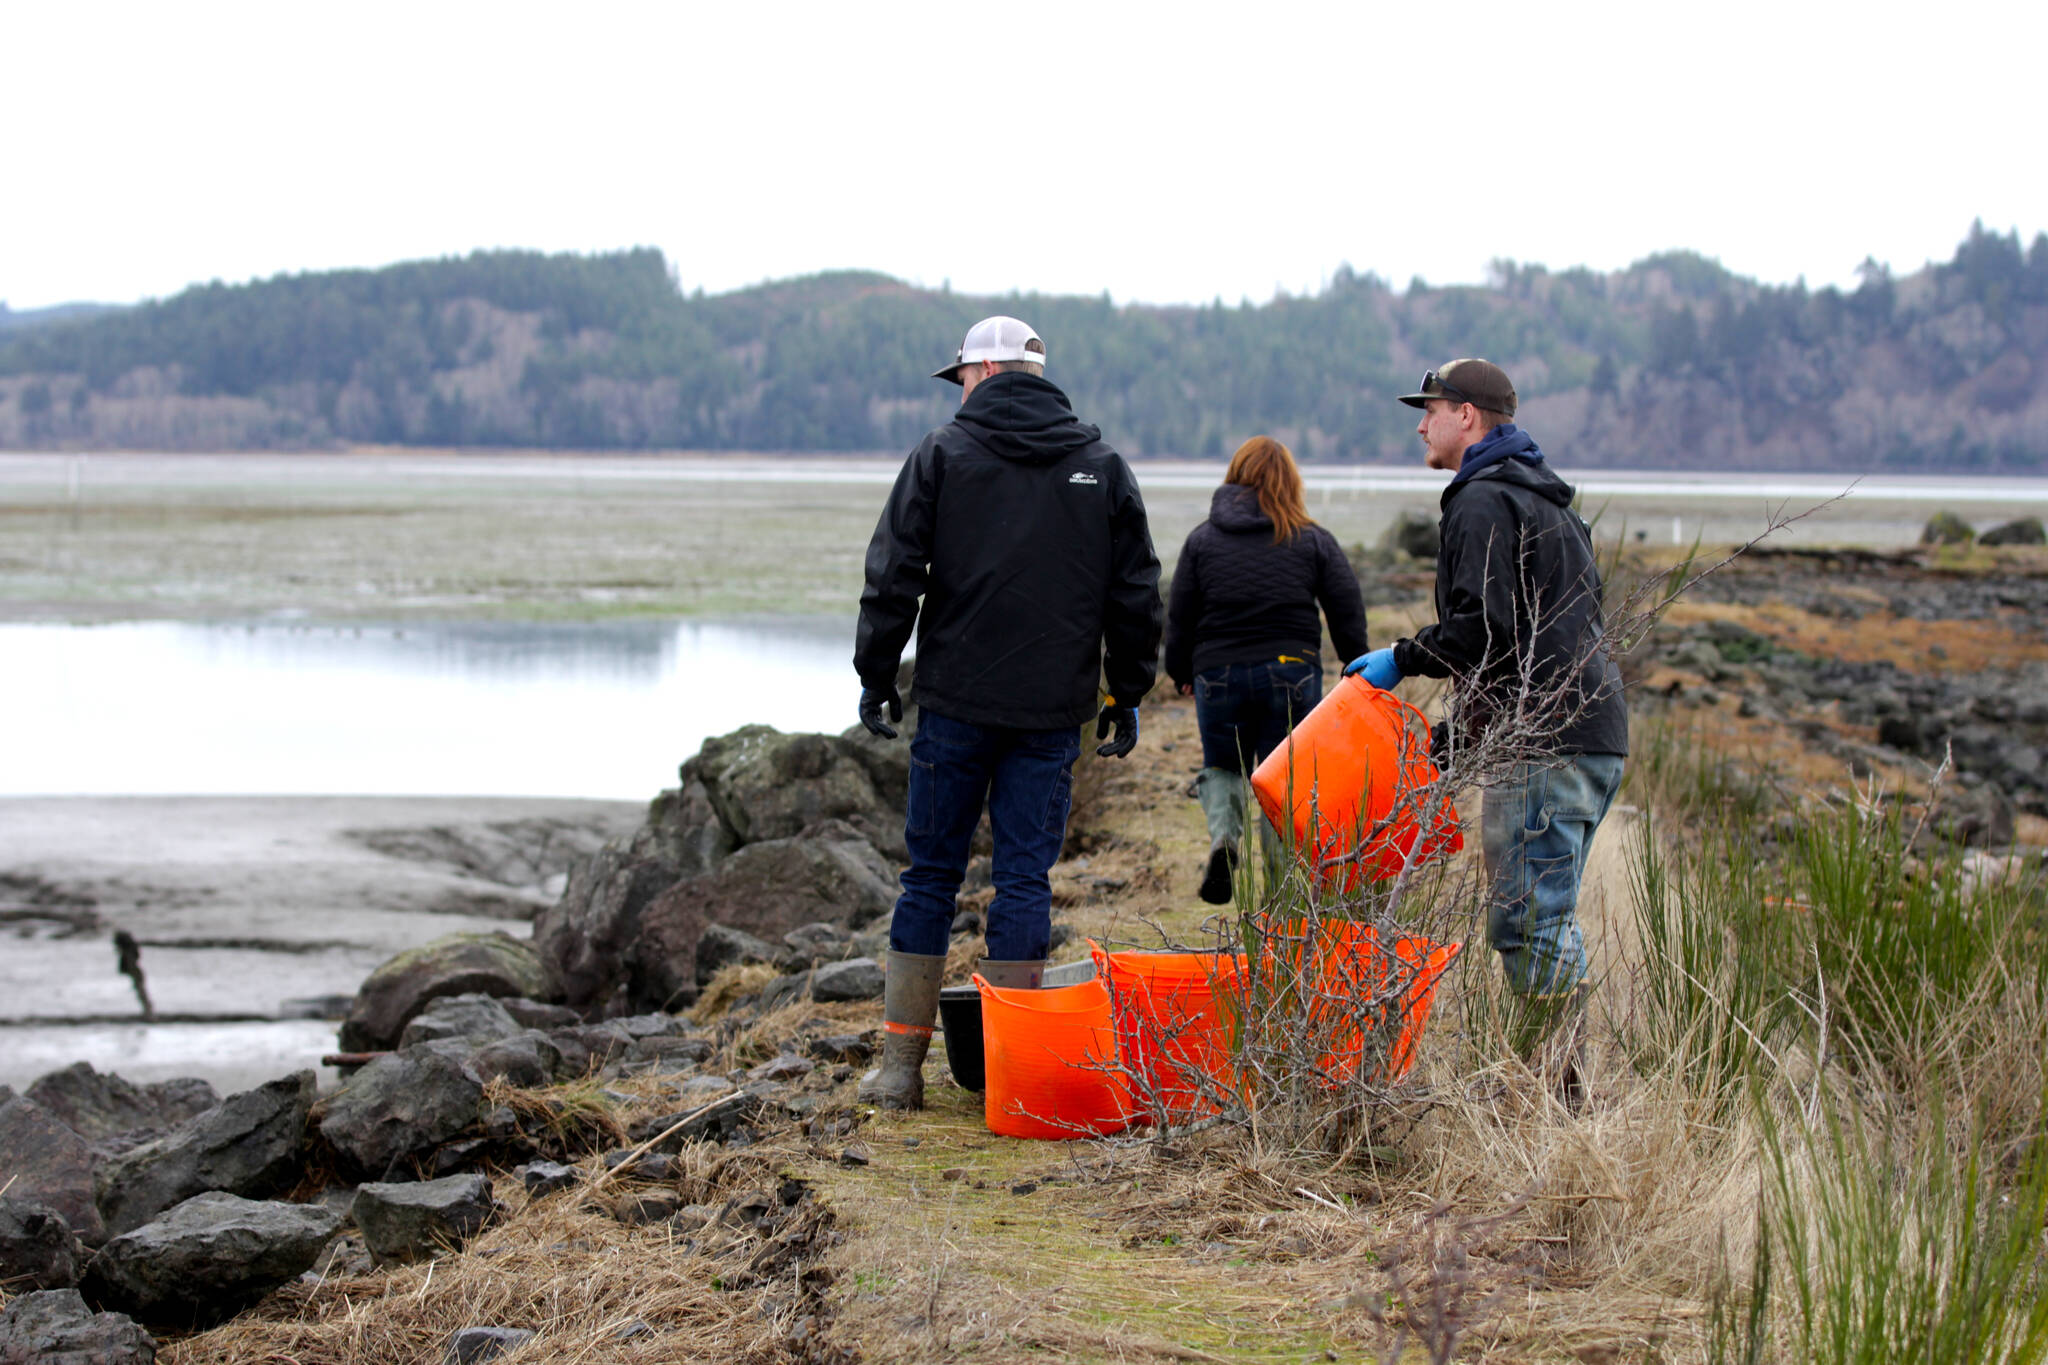 MIchael S. Lockett / The Daily World
Members of the Shoalwater Bay Indian Tribe’s Department of Natural Resources traipse out to go perform removal of European green crabs from traps on Jan. 26.